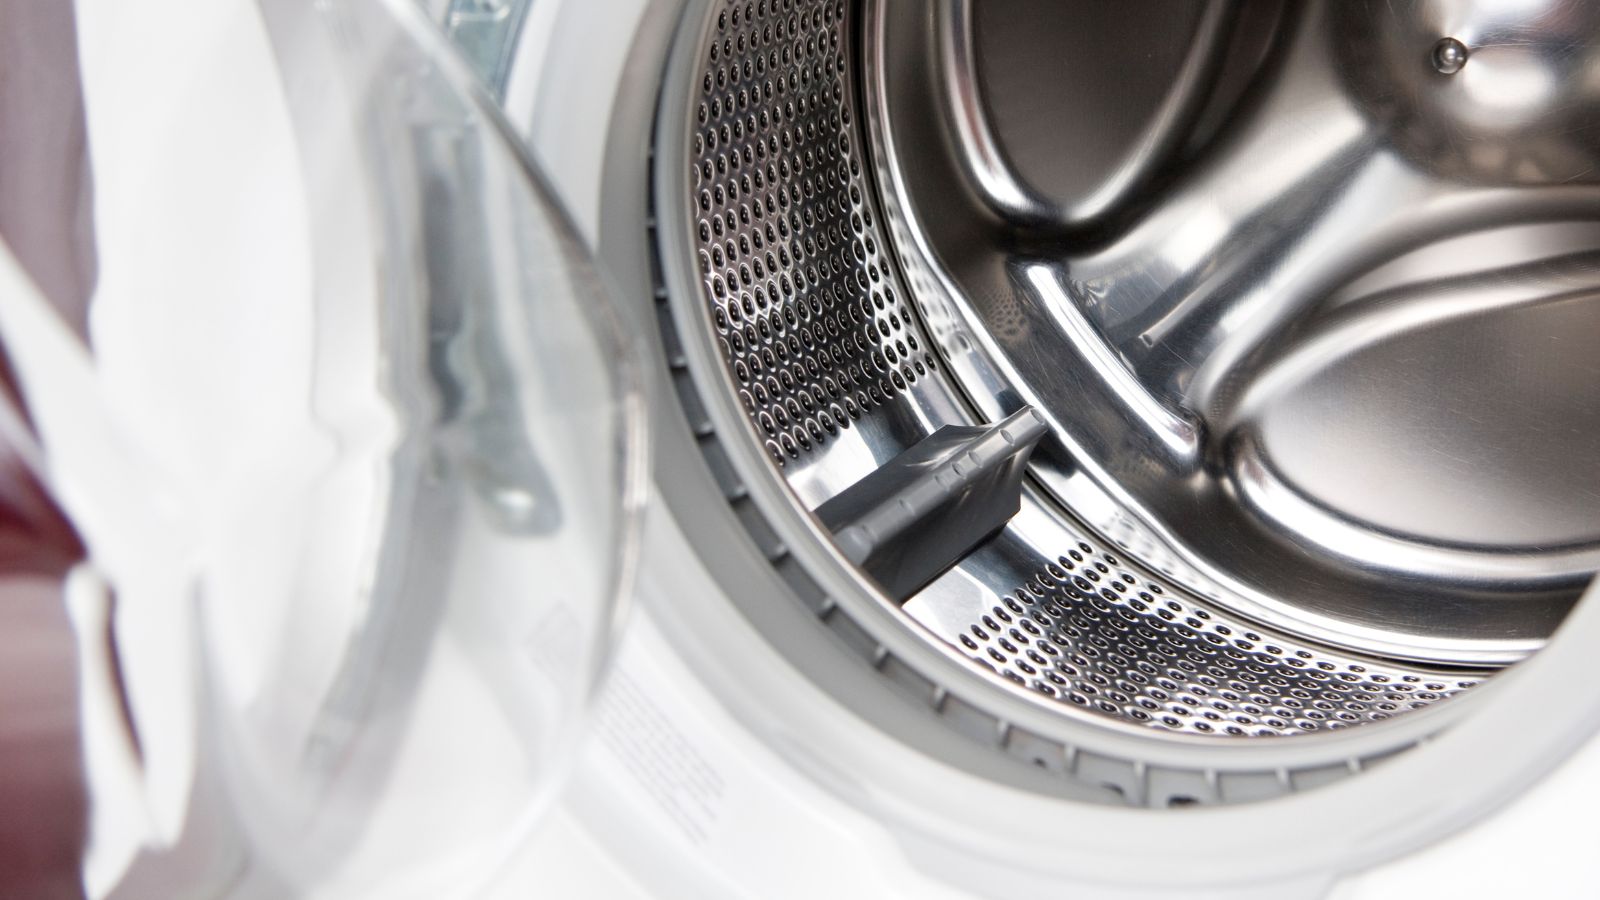 Is Mold In Your Front-Load Washing Machine Harmful?